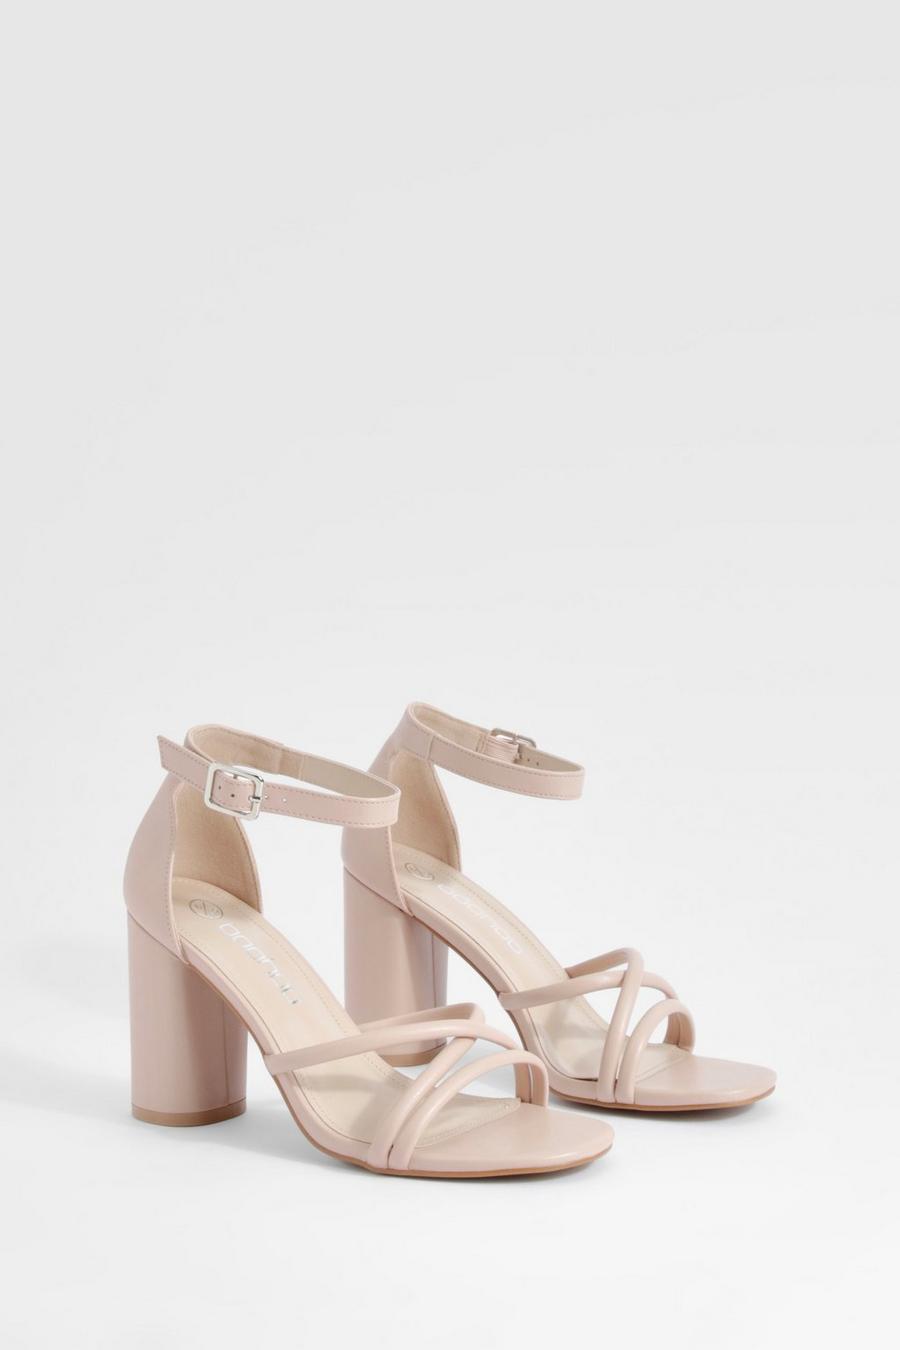 Nude Prefer a hiking sandal that wraps the foot comfortably